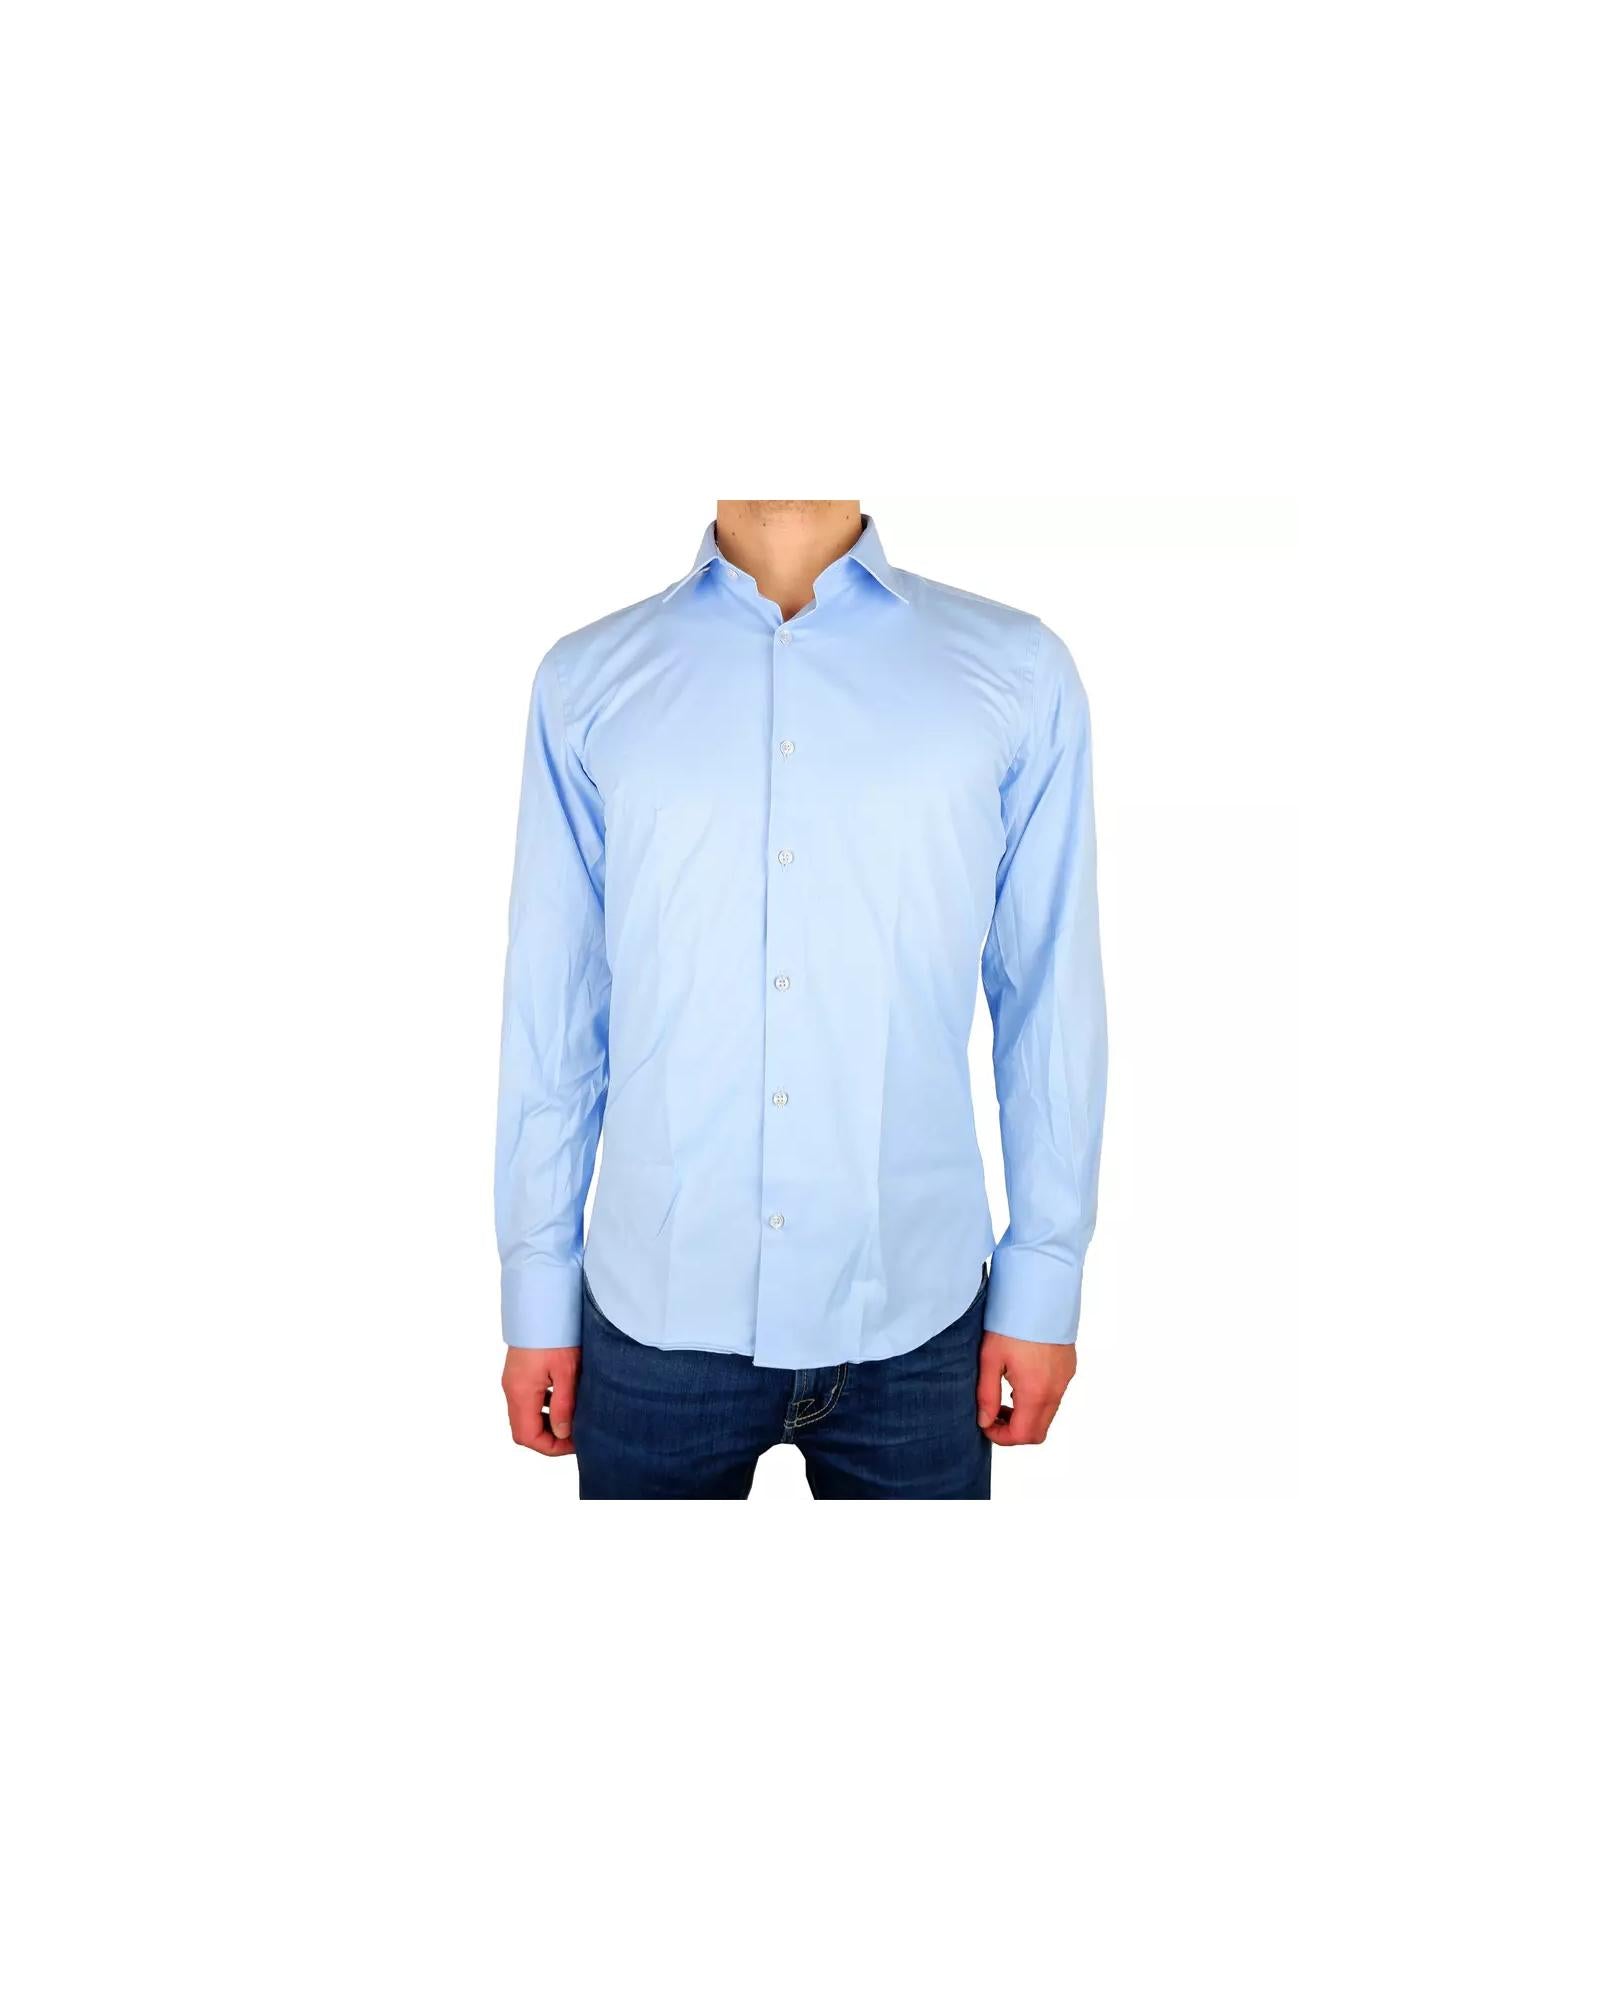 Milano Solid Color Shirt in Light Blue - Soft Satin Fabric - 100% Cotton 39 IT Men